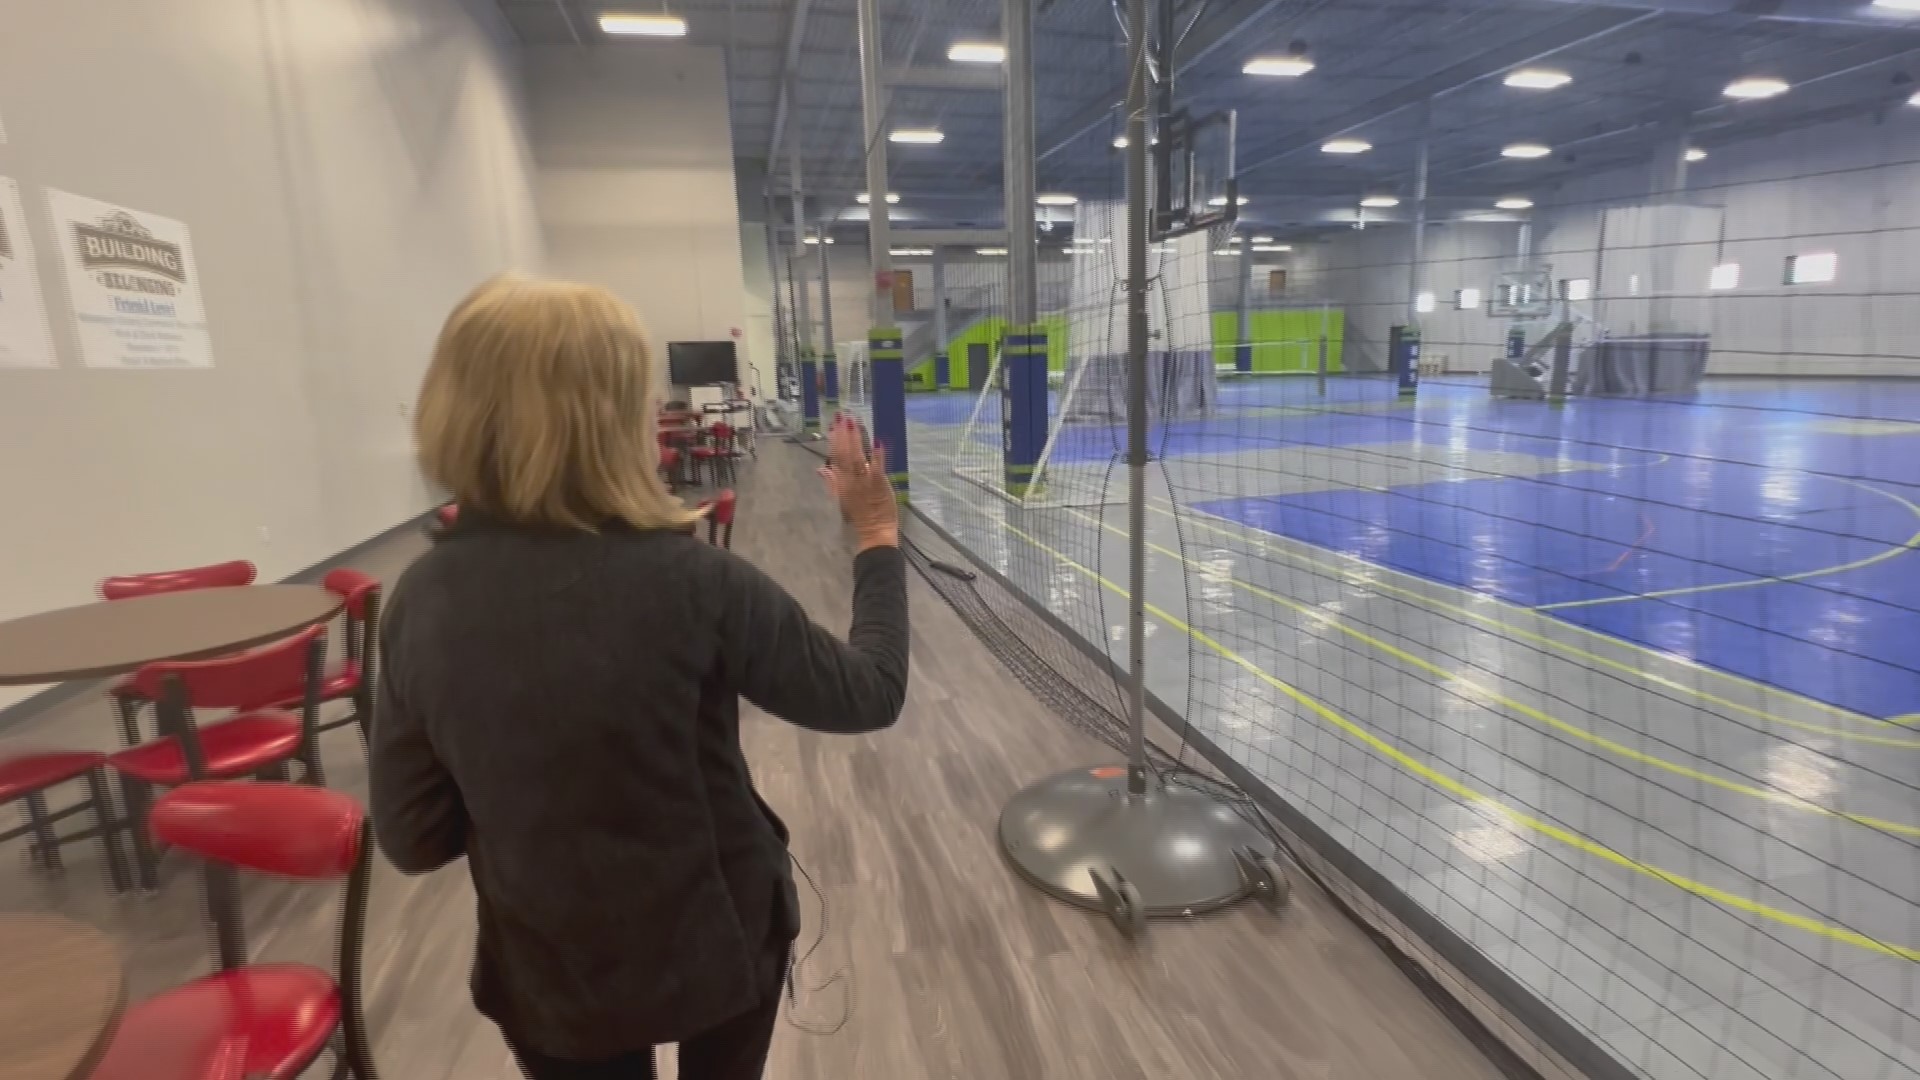 A Muskegon-based organization endowing children with special needs, sense of community and belonging via team sports recently revealed its upgraded headquarters.